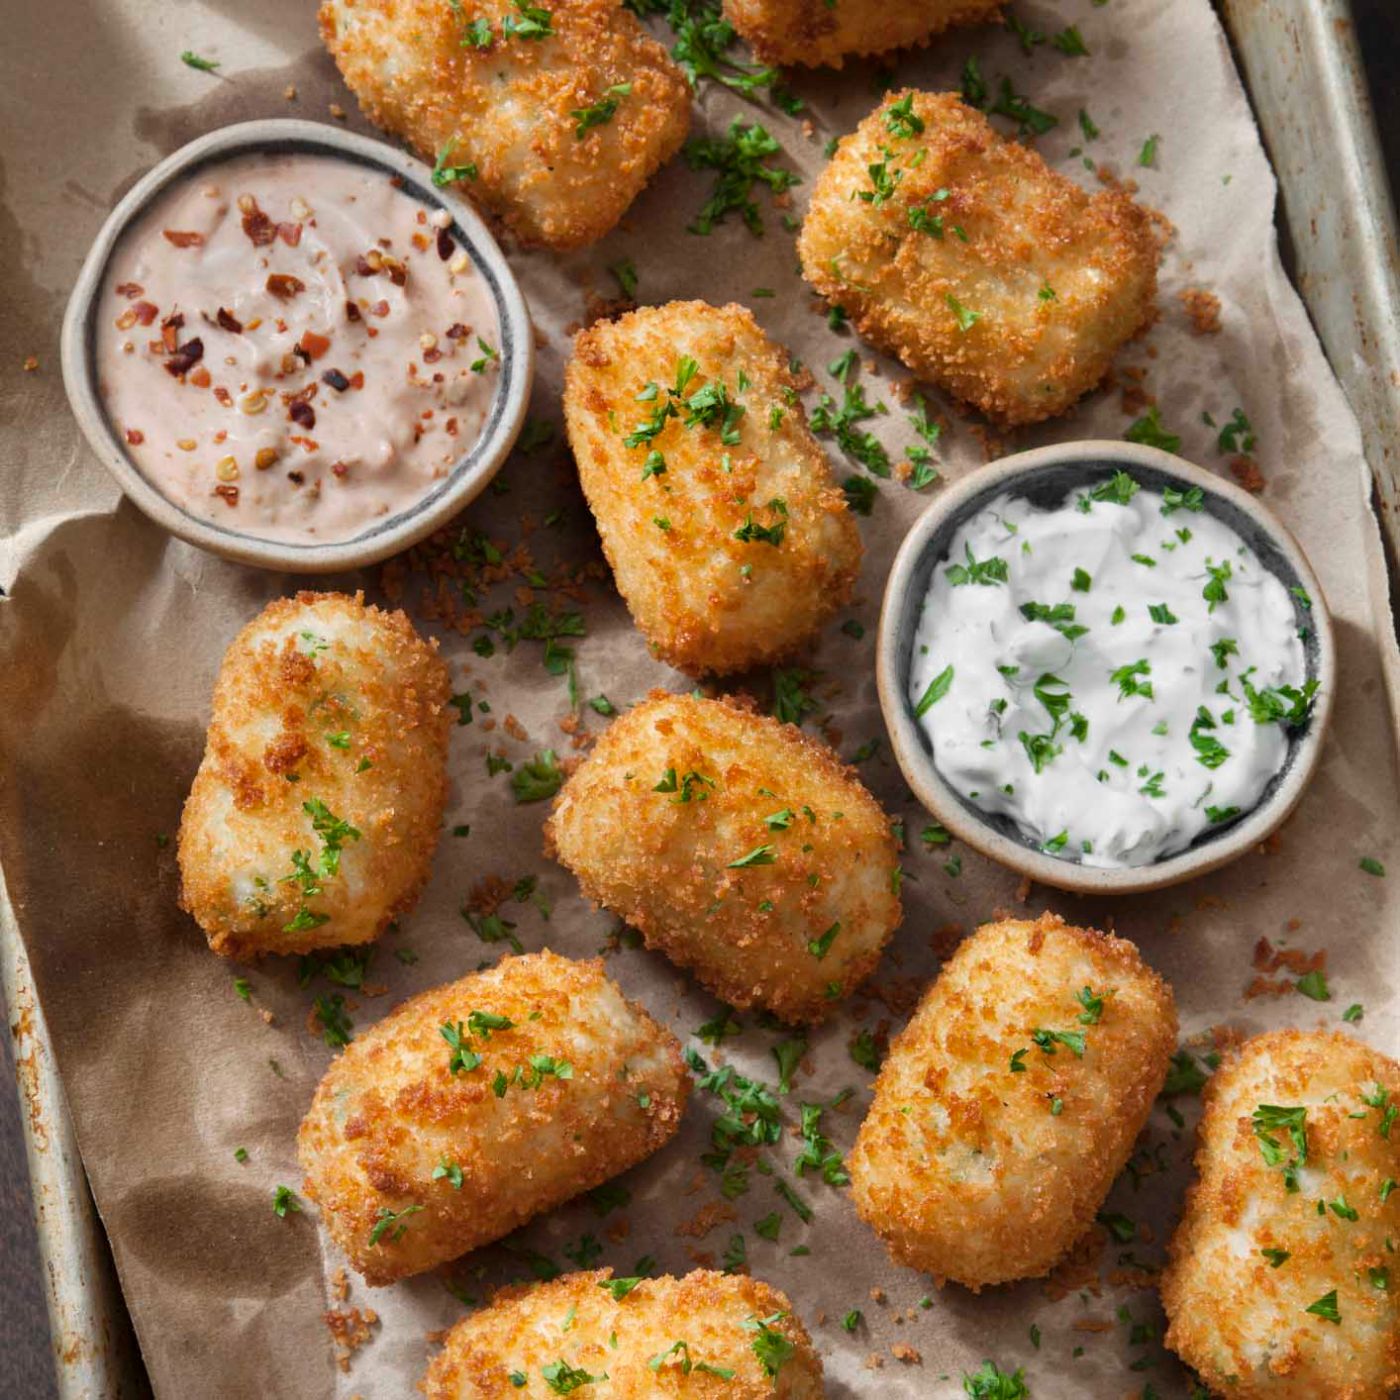 Creamy-Mashed-Potato-Croquettes-with-Cheese-and-Sour-Cream-Dip-1266637075_1416x2125 square.jpeg